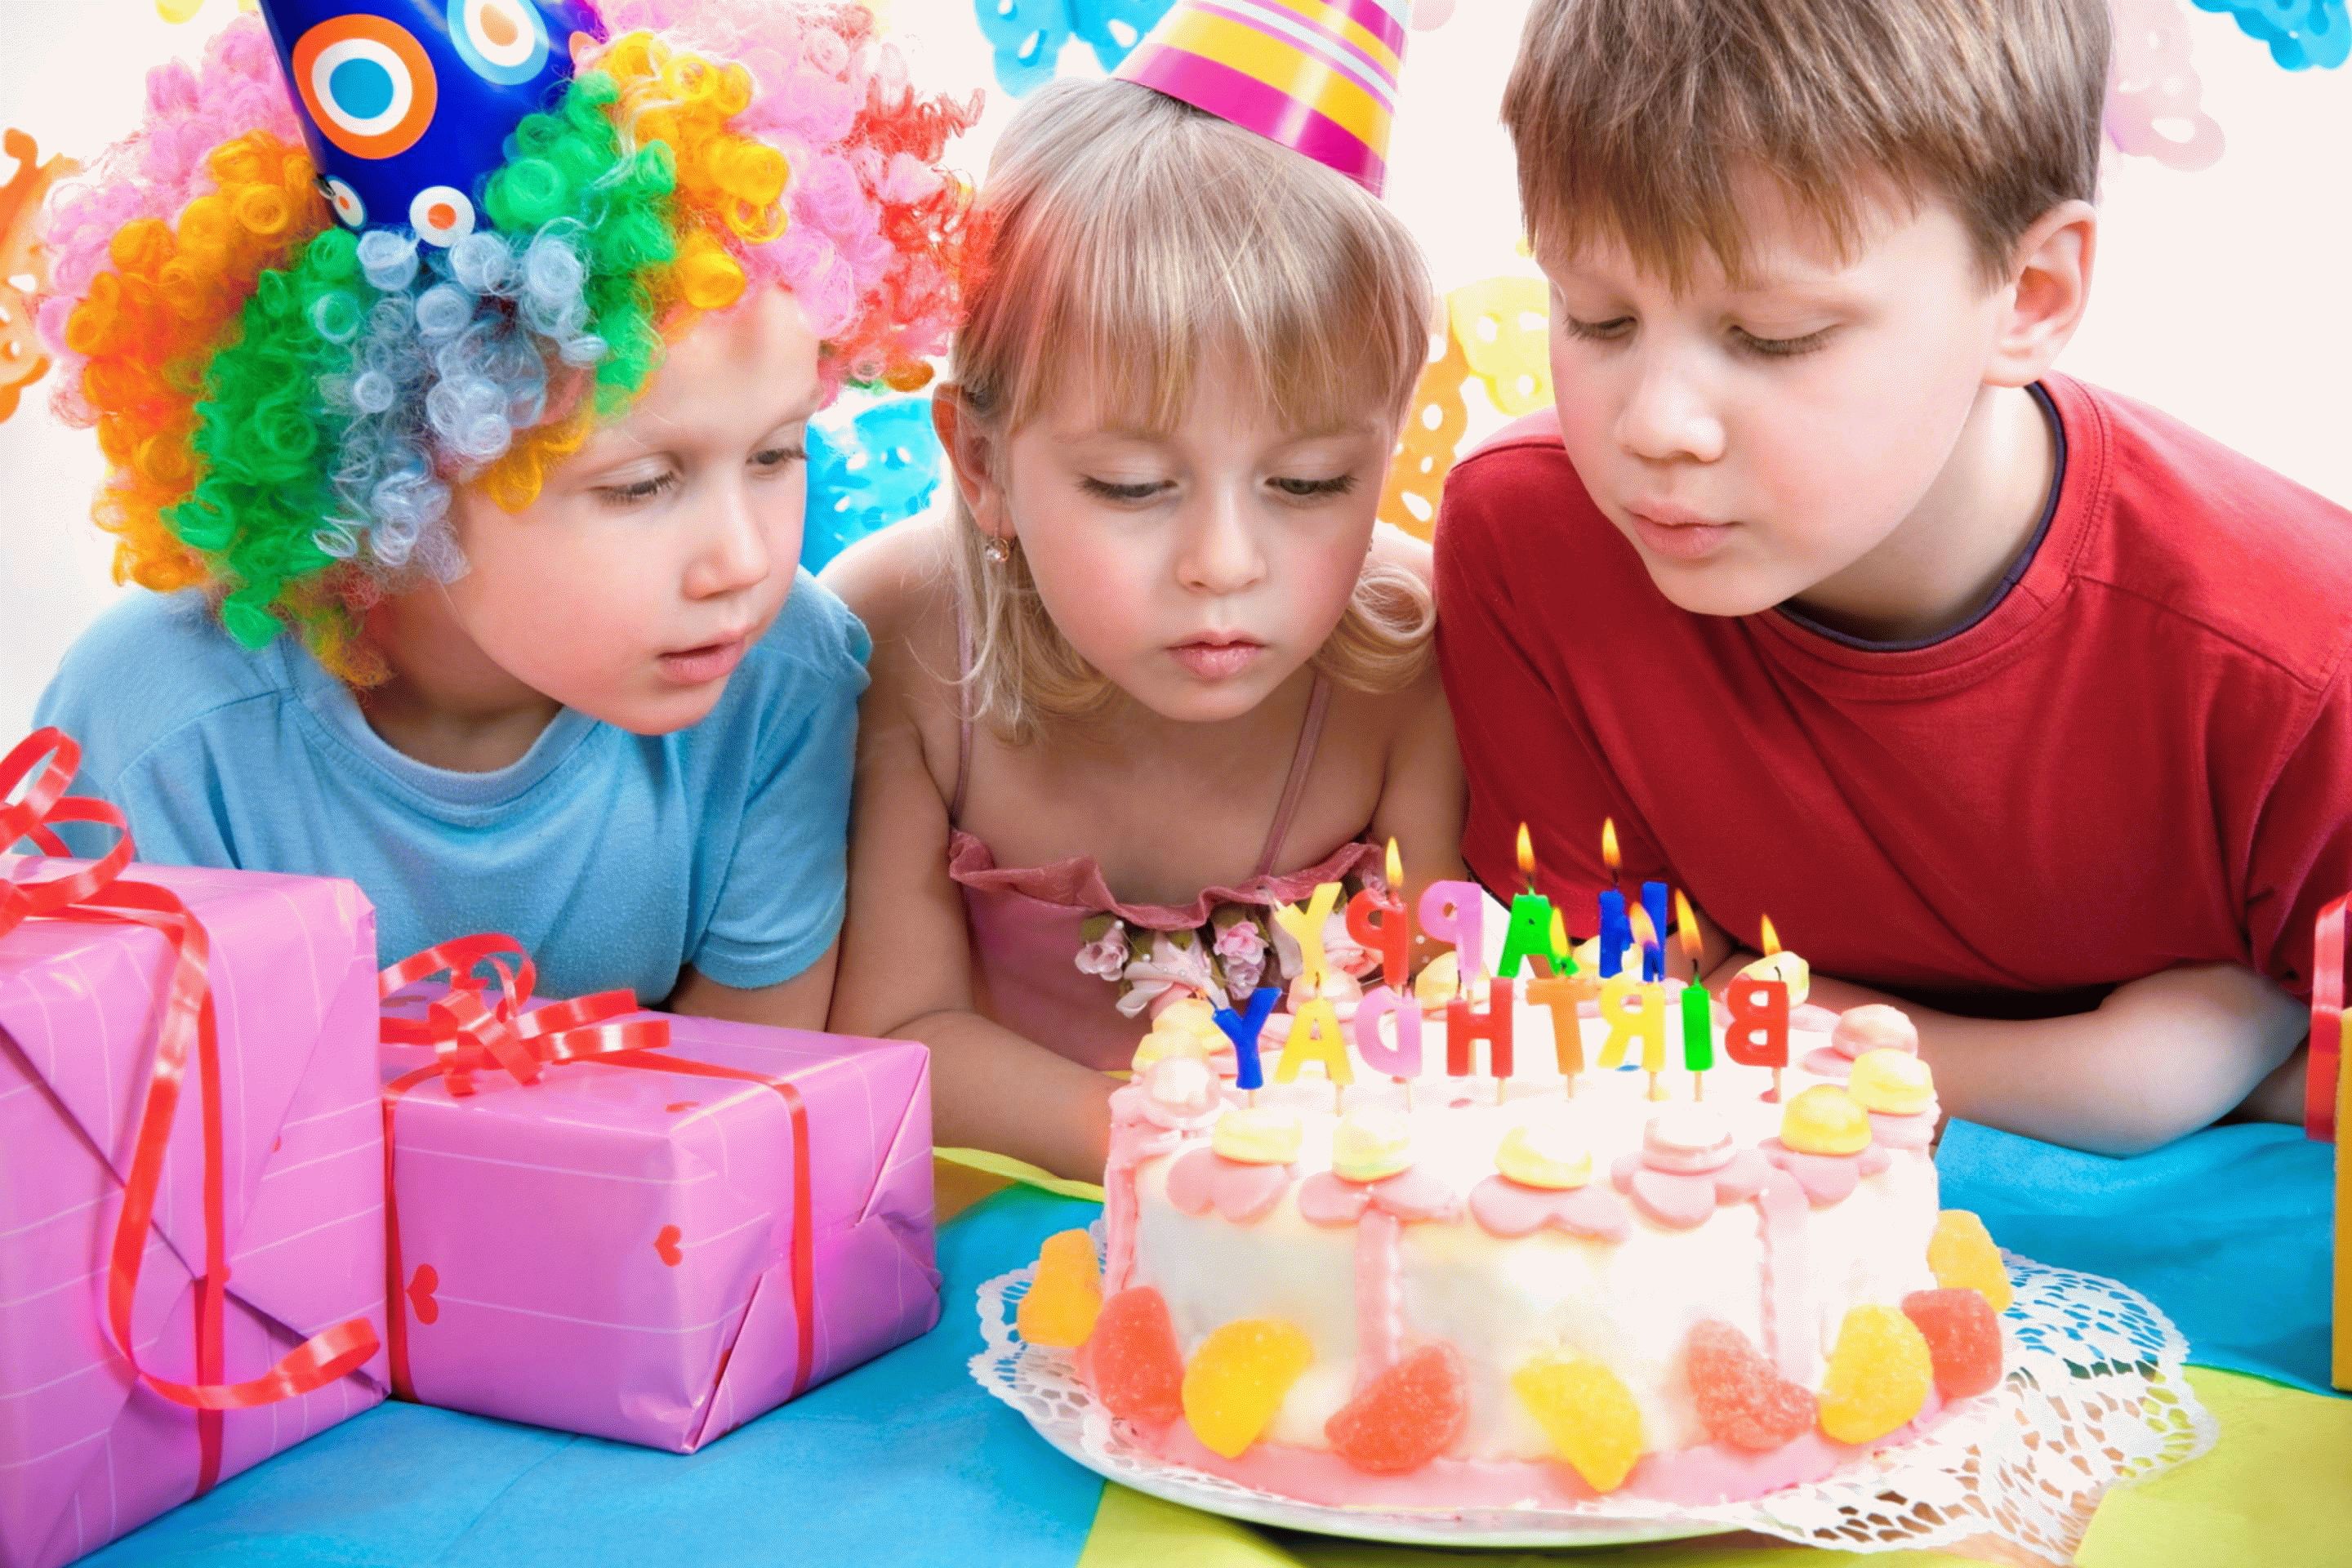 What gifts to buy in kindergarten for birthday in 2020